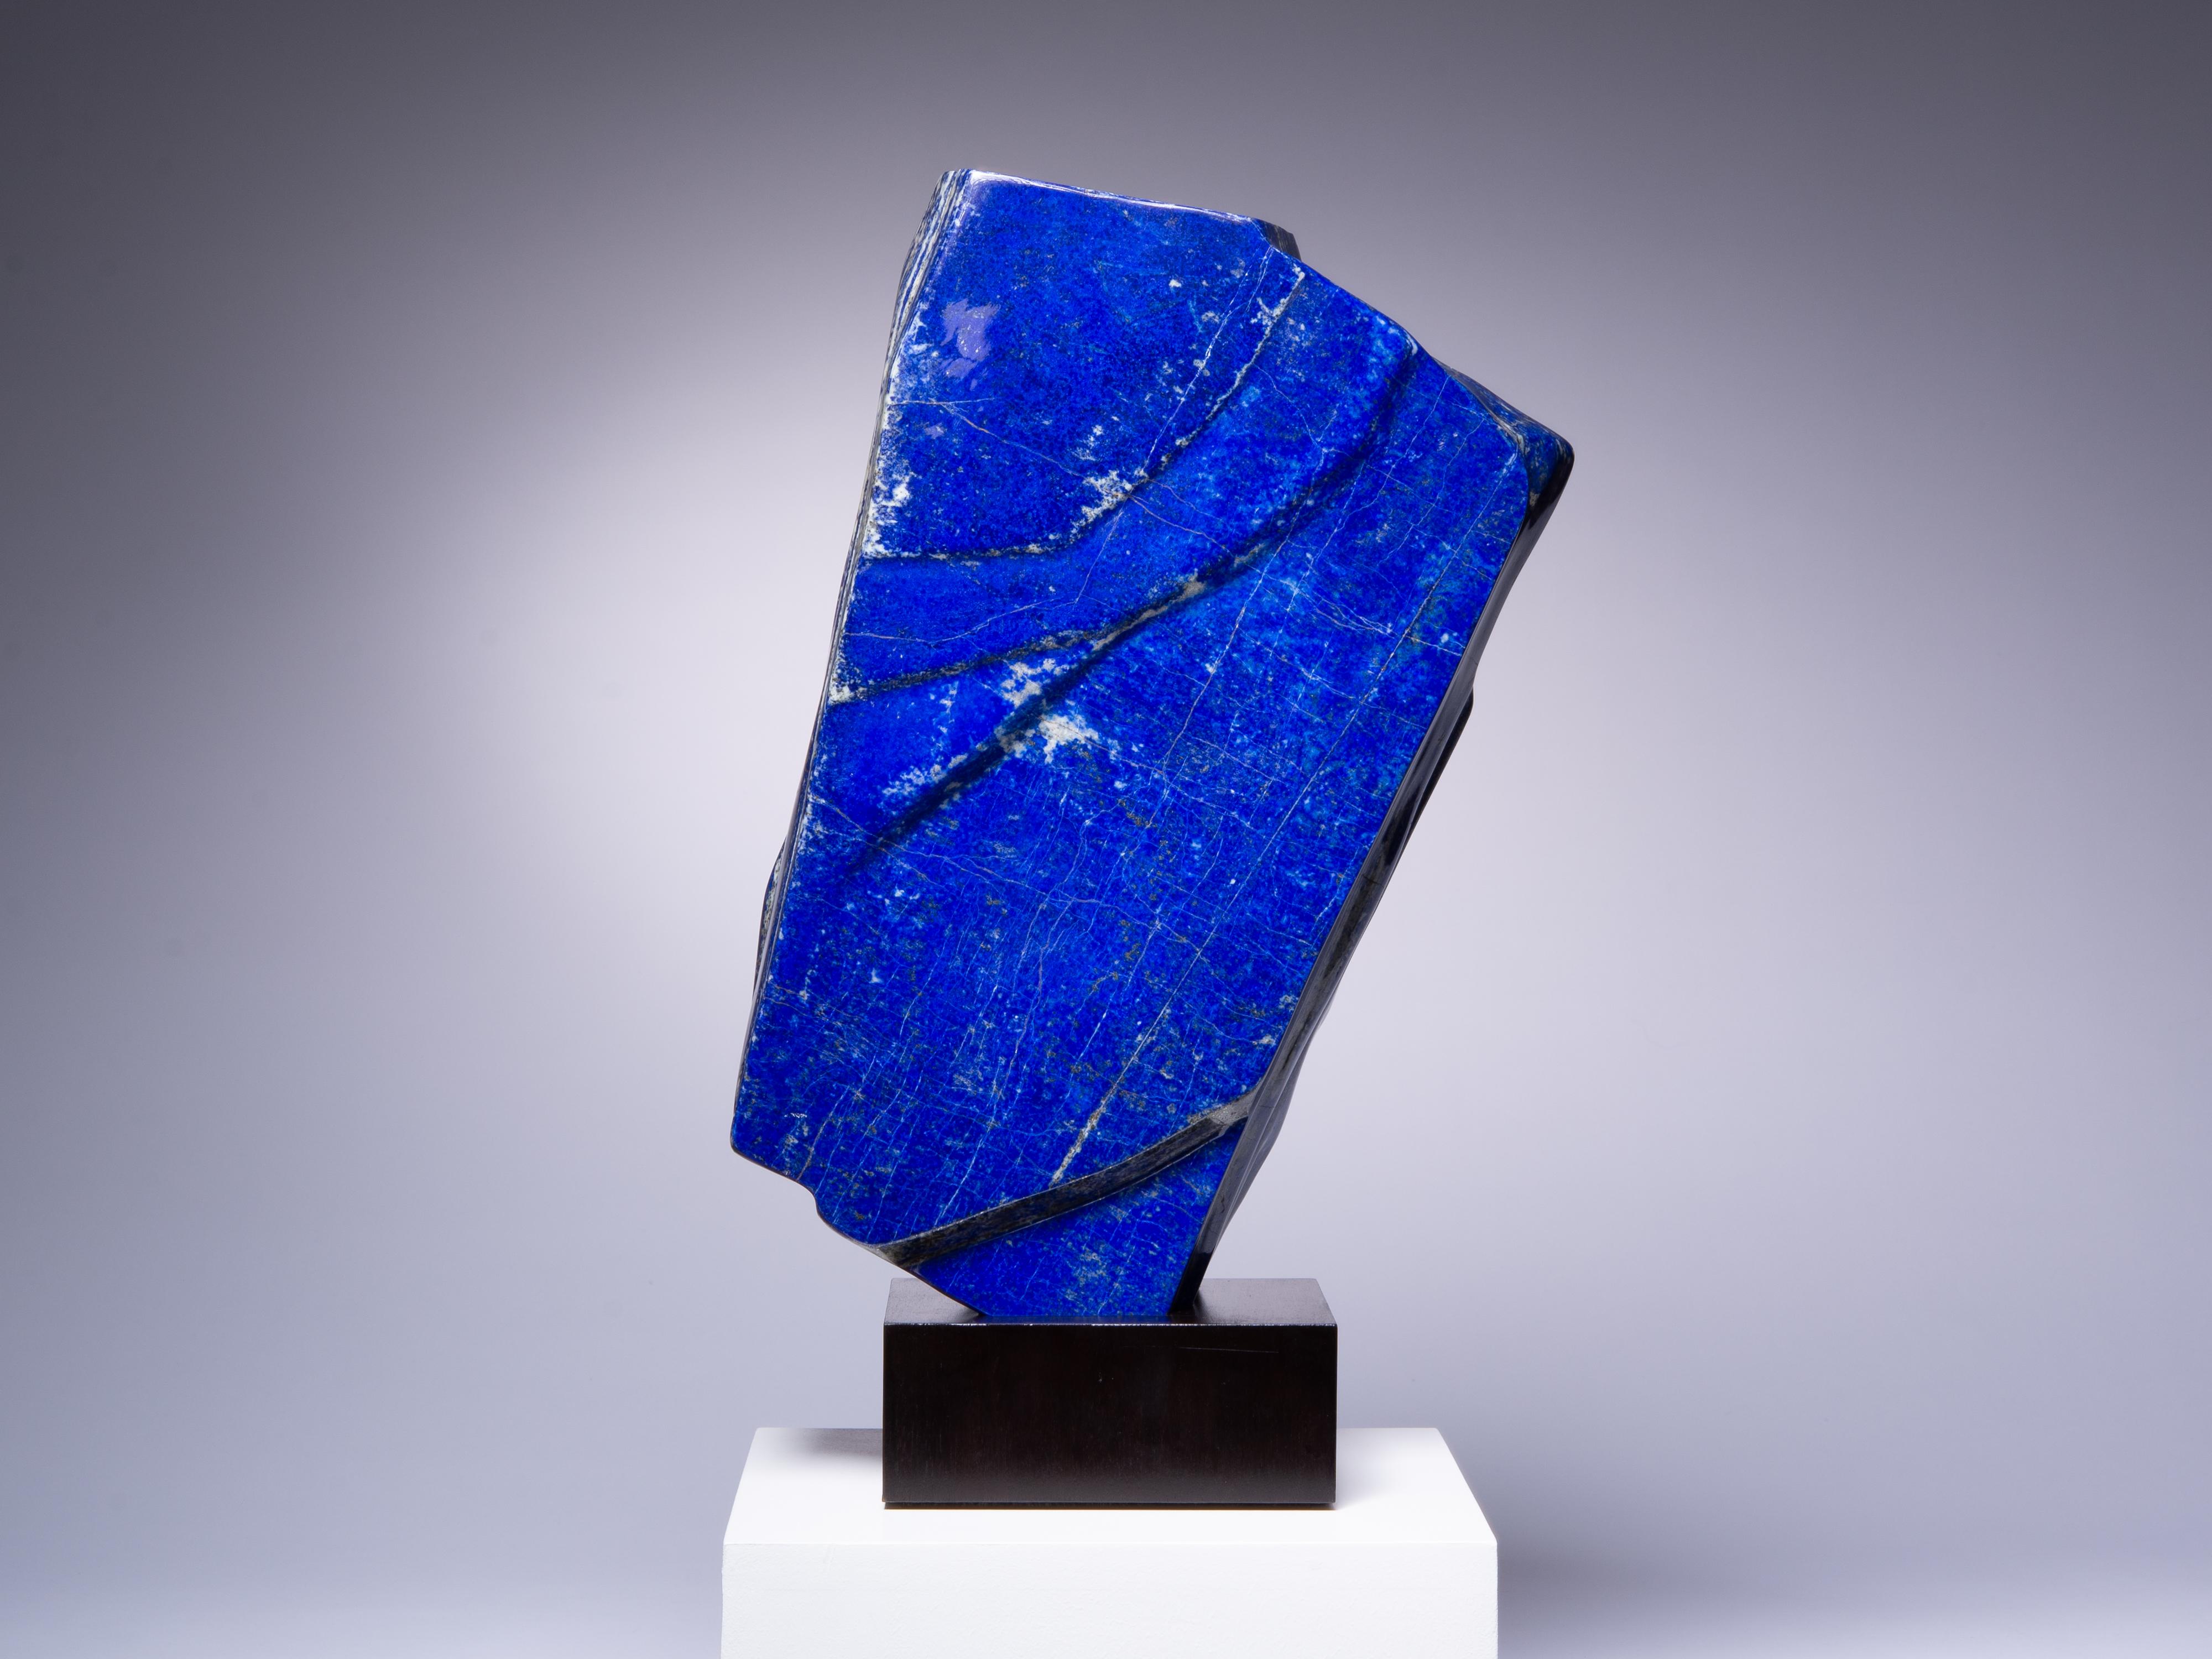 A gorgeous slab of vibrant lapis lazuli. Lapis lazuli inclides lazurite (intense
blue), calcite (white veins) and pyrite (gold flecks). Prized since ancient
times, this is a wonderful example.

This piece was legally and ethically